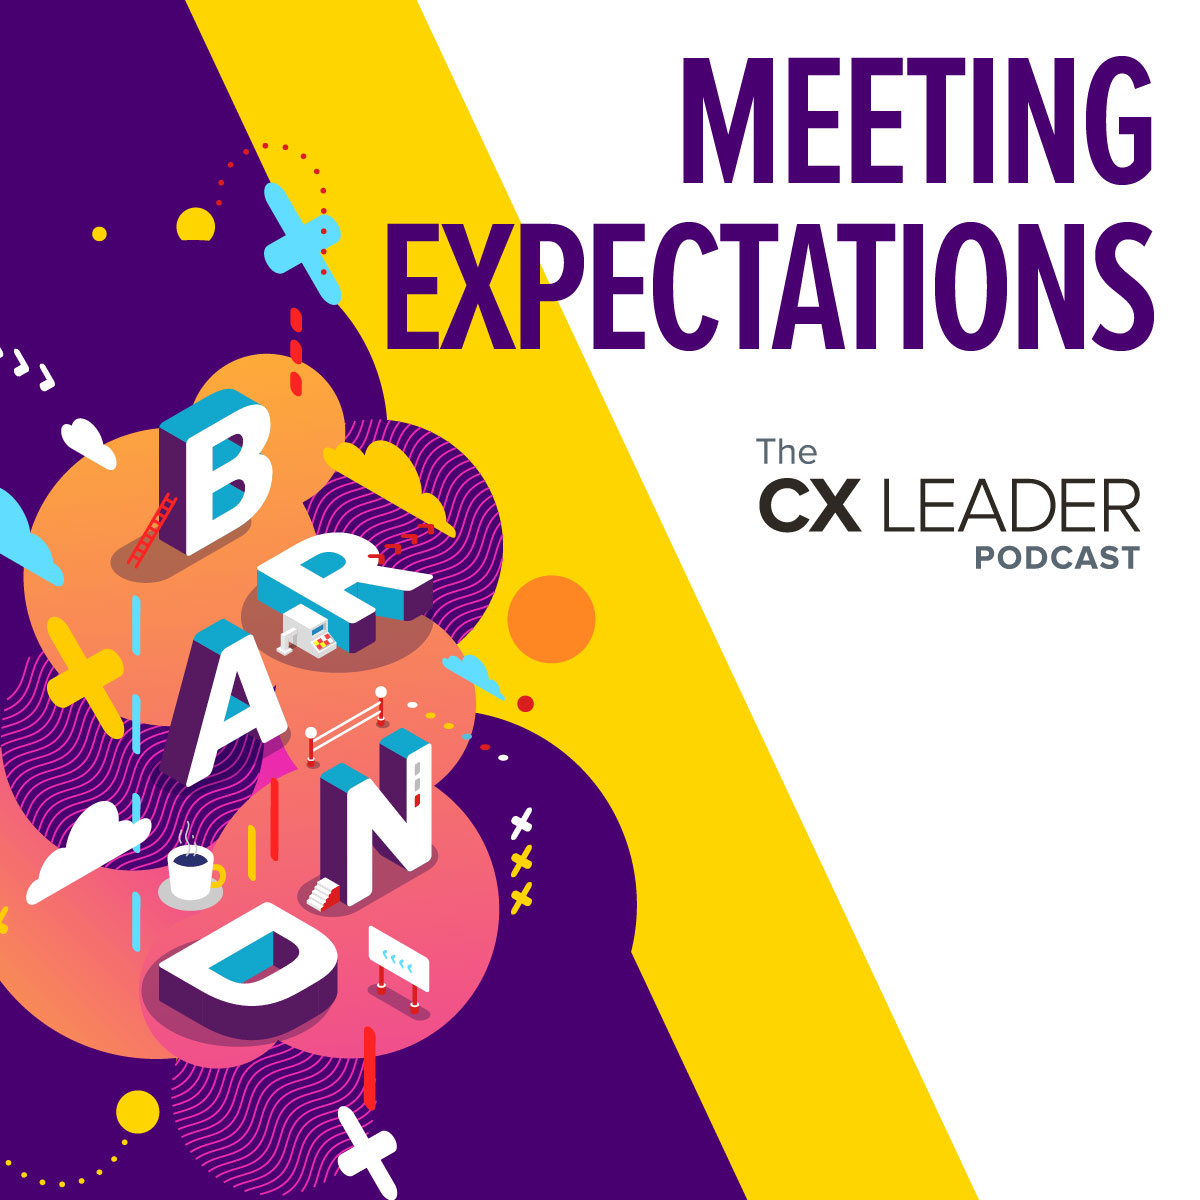 Meeting Expectations